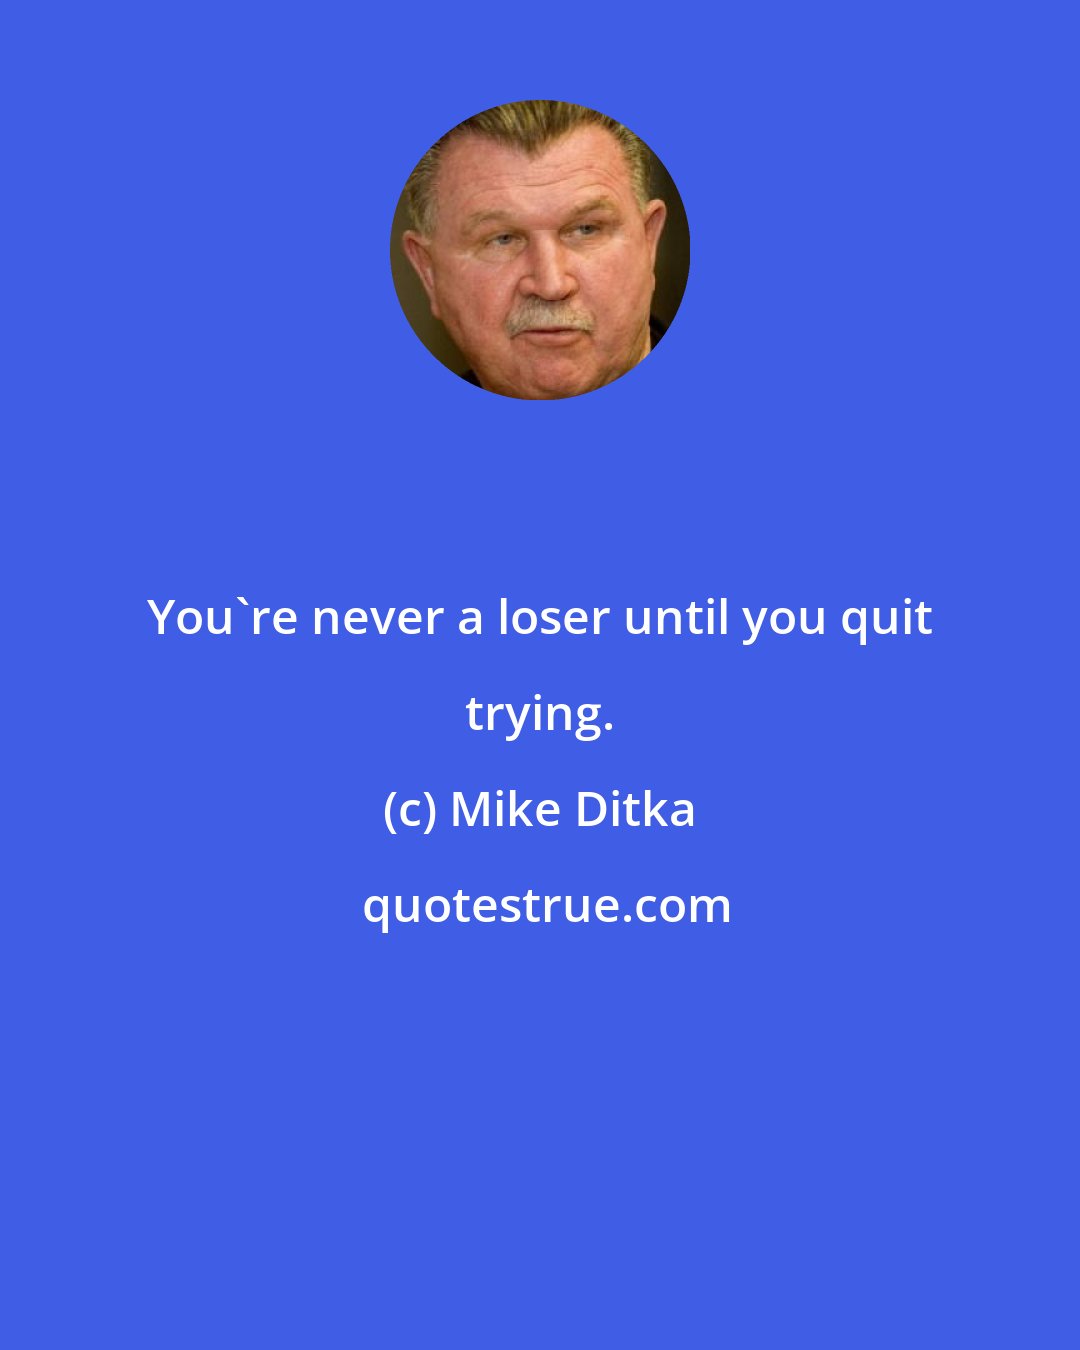 Mike Ditka: You're never a loser until you quit trying.